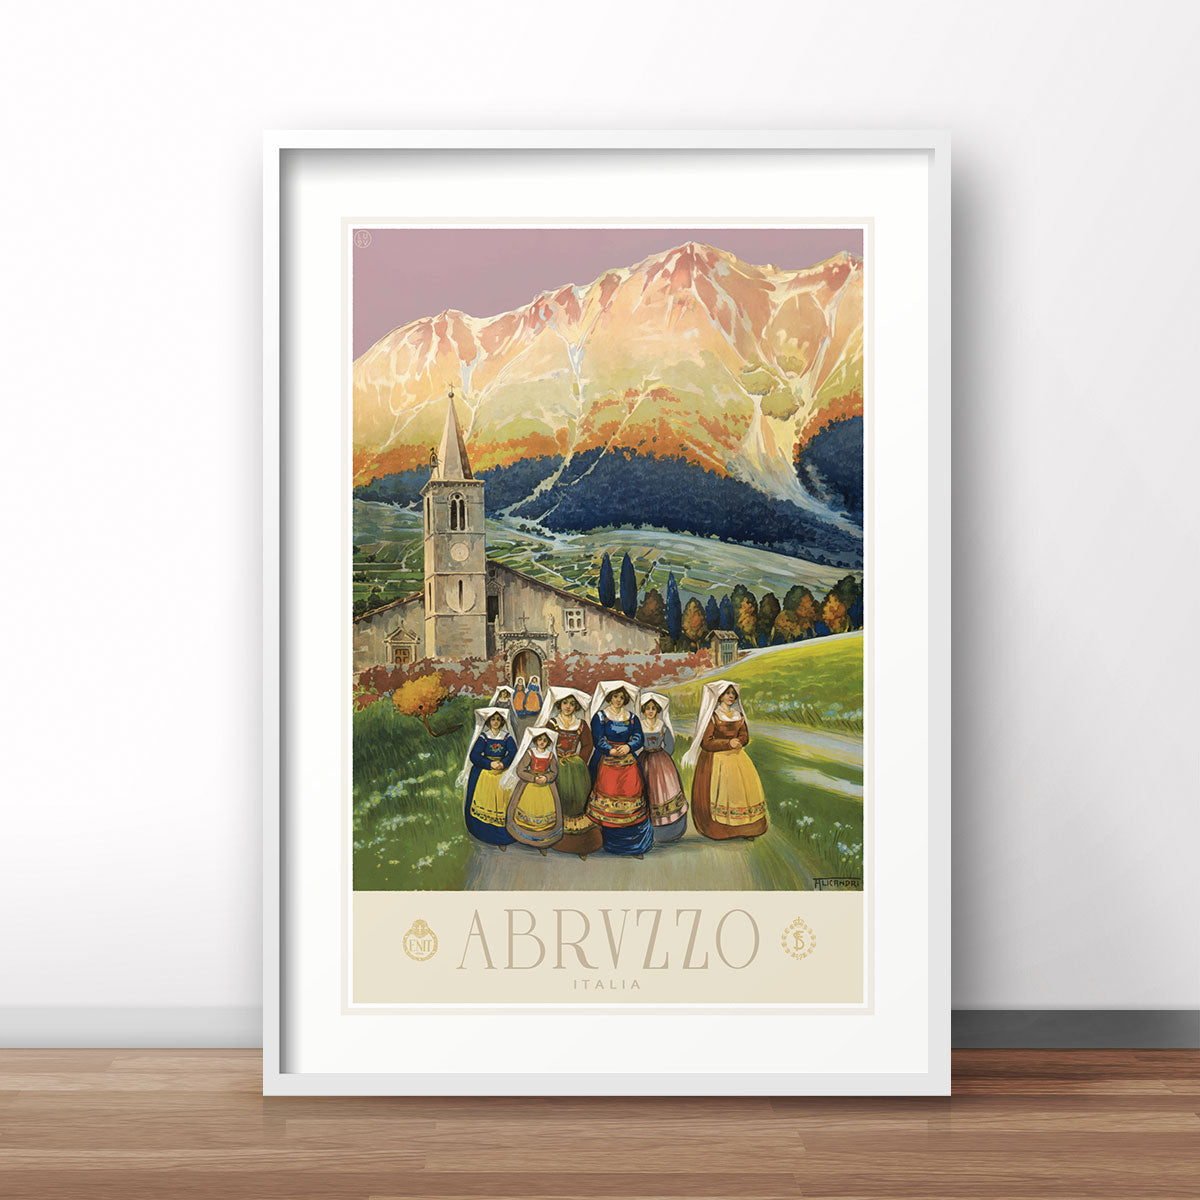 Abrvzzo Italy retro vintage poster print from Places We Luv